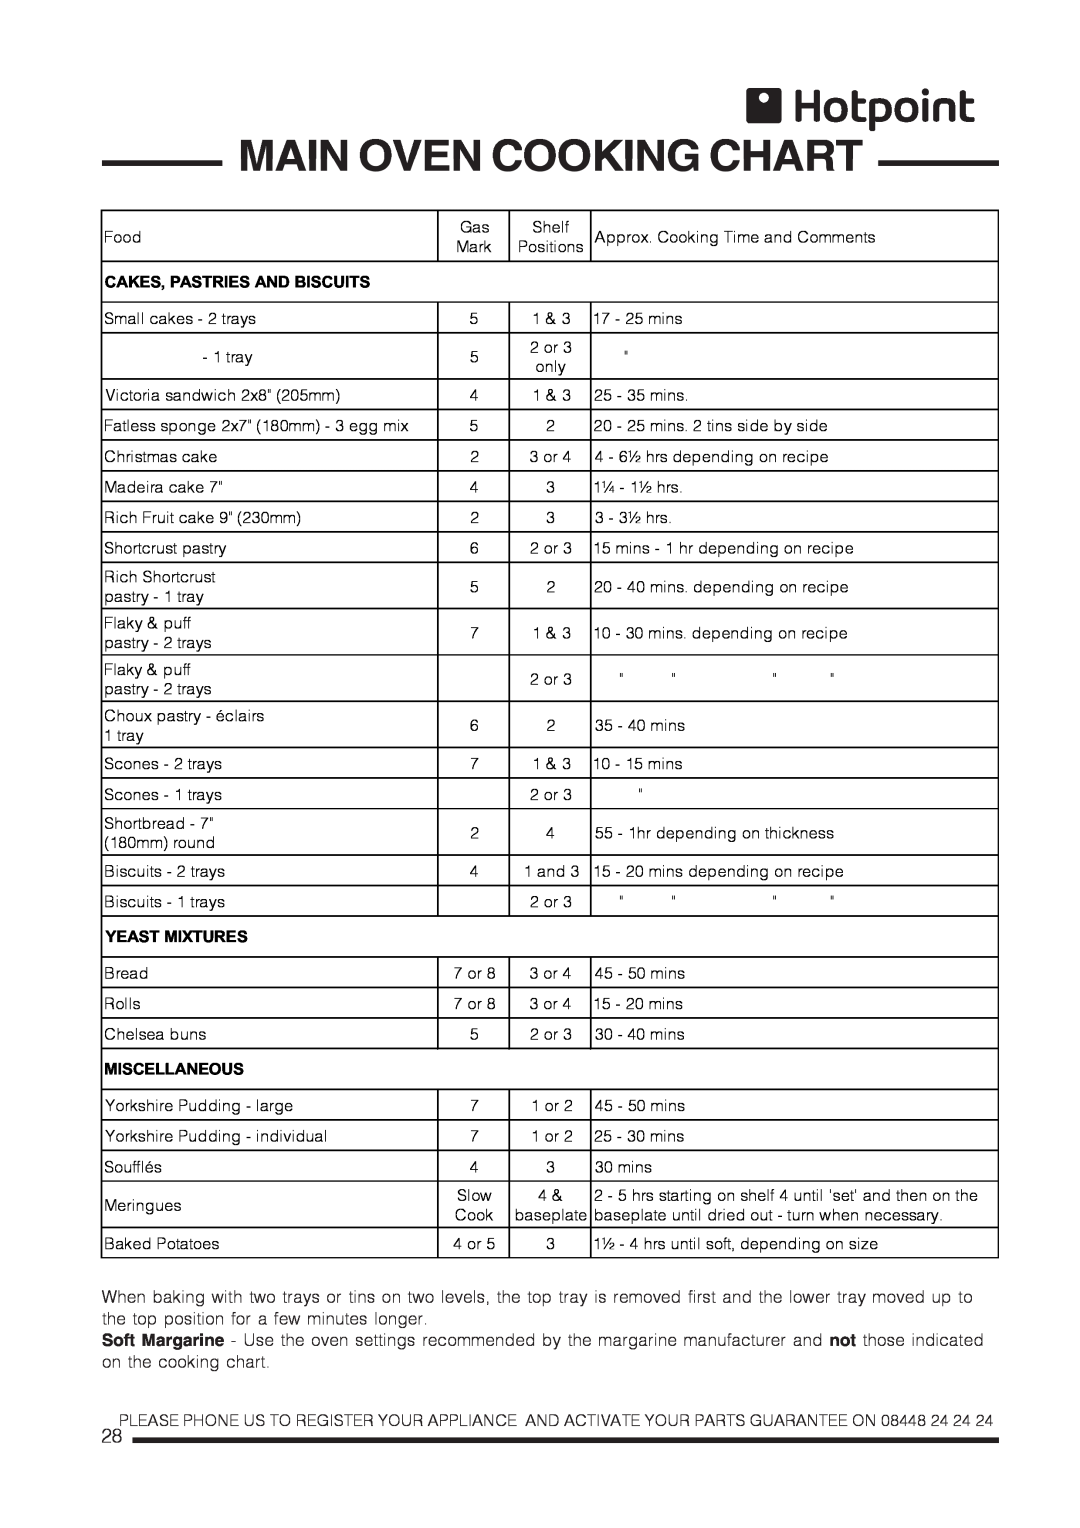 Hotpoint CH60GTCF, CH60GTXF installation instructions Main Oven Cooking Chart 